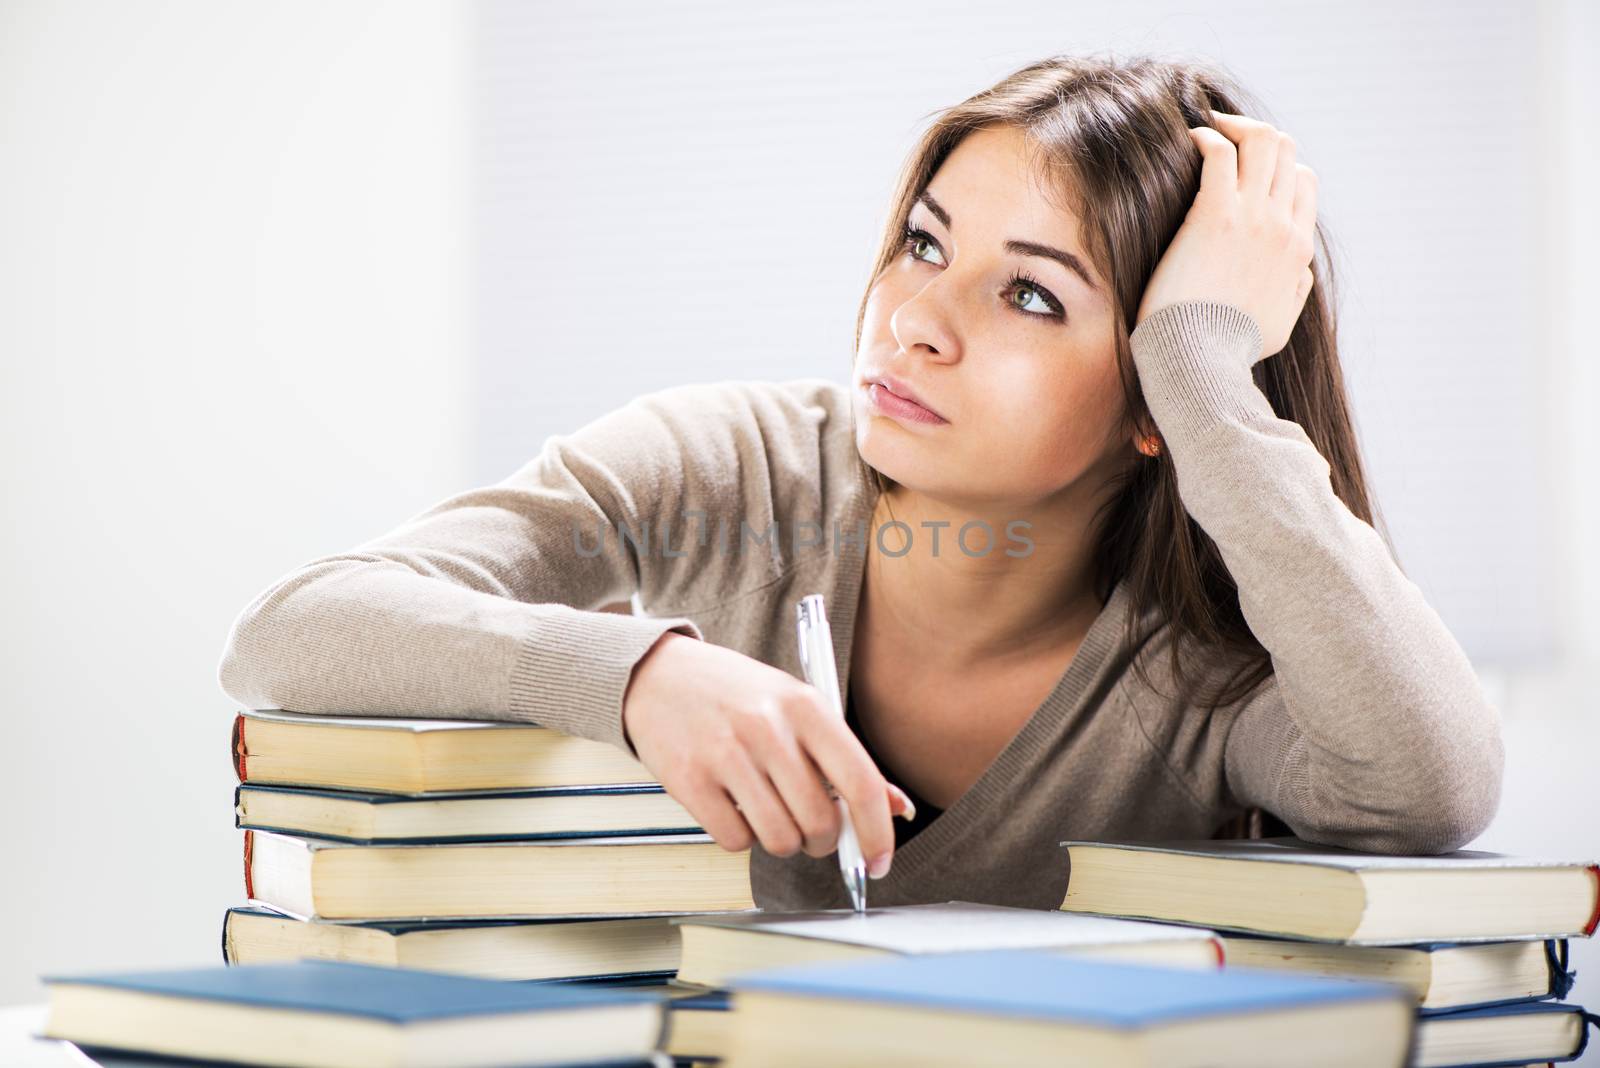 Tired student sitting with many books, with her head in hand.